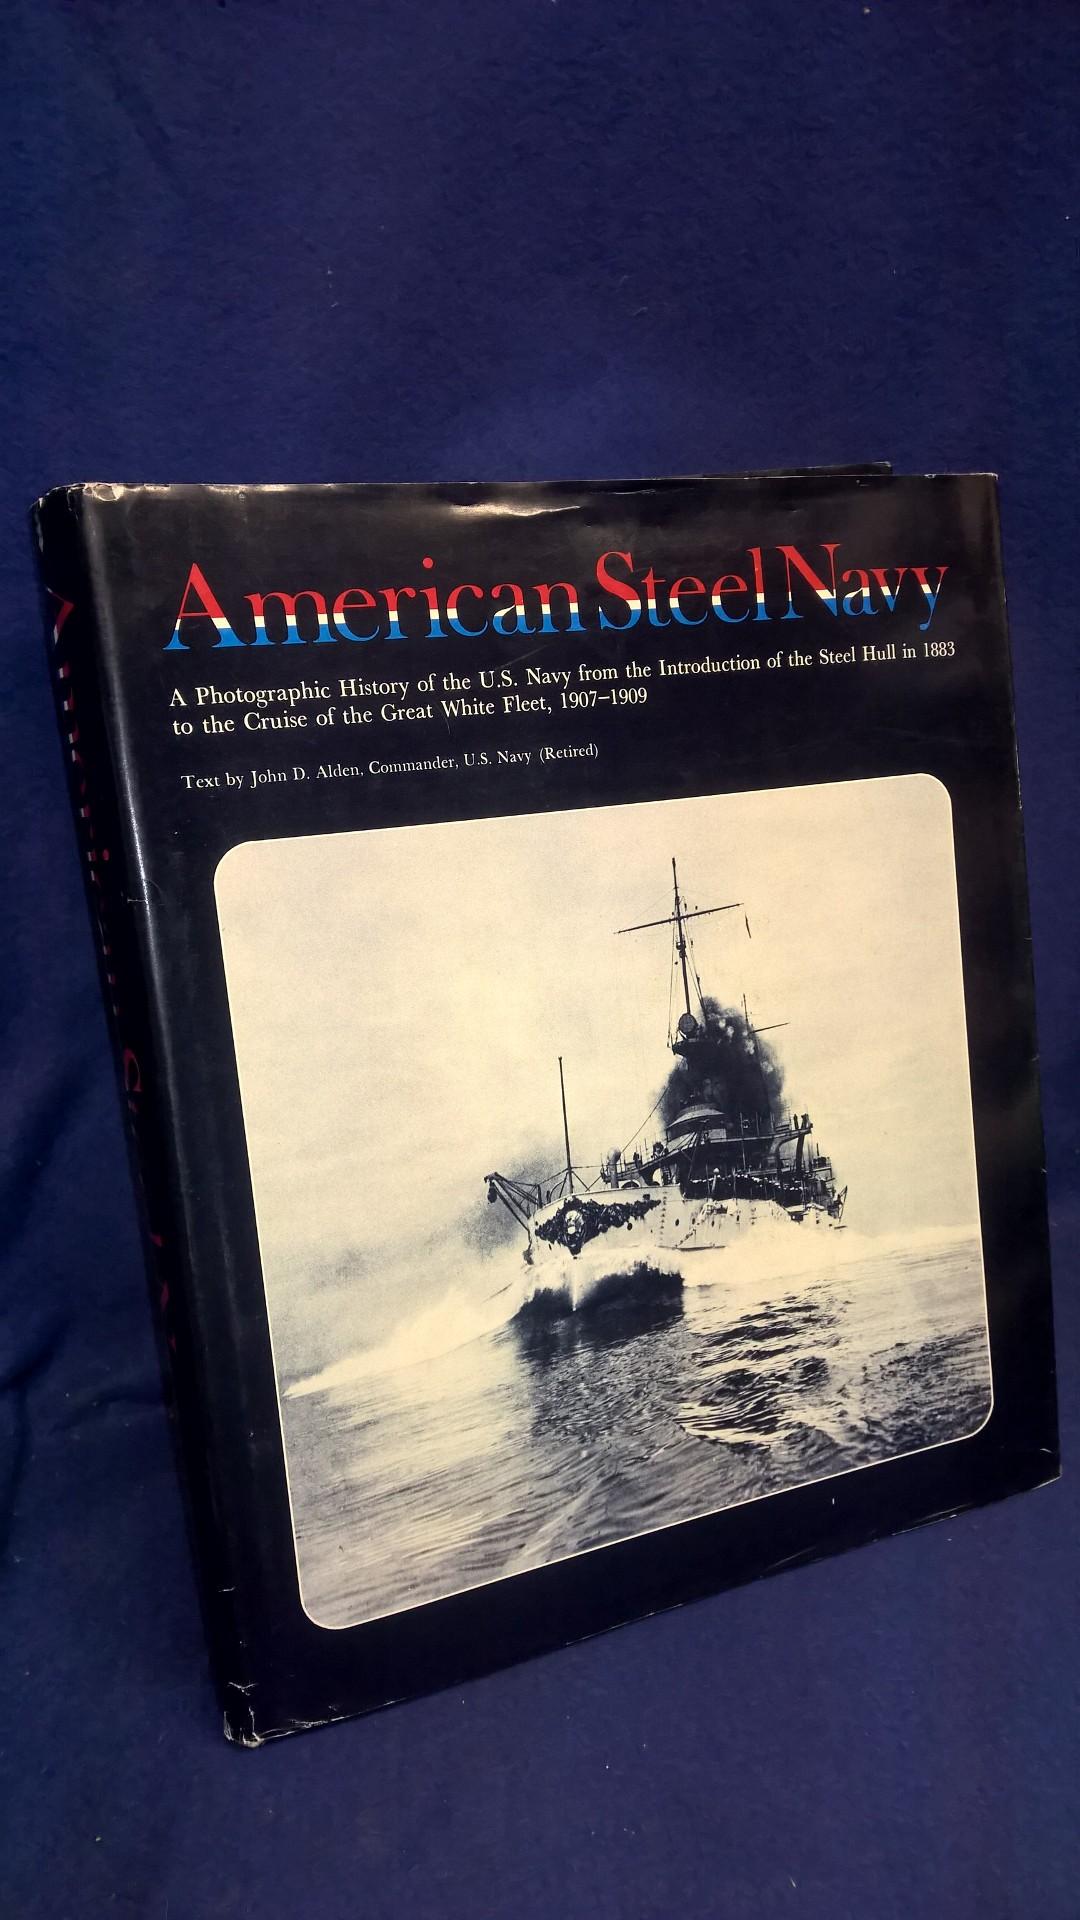 The American Steel Navy: A Photographic History of the U.S. Navy from the Introduction of the Steel Hull in 1883 to the Cruise of the Great White Fleet, 1907-1909.